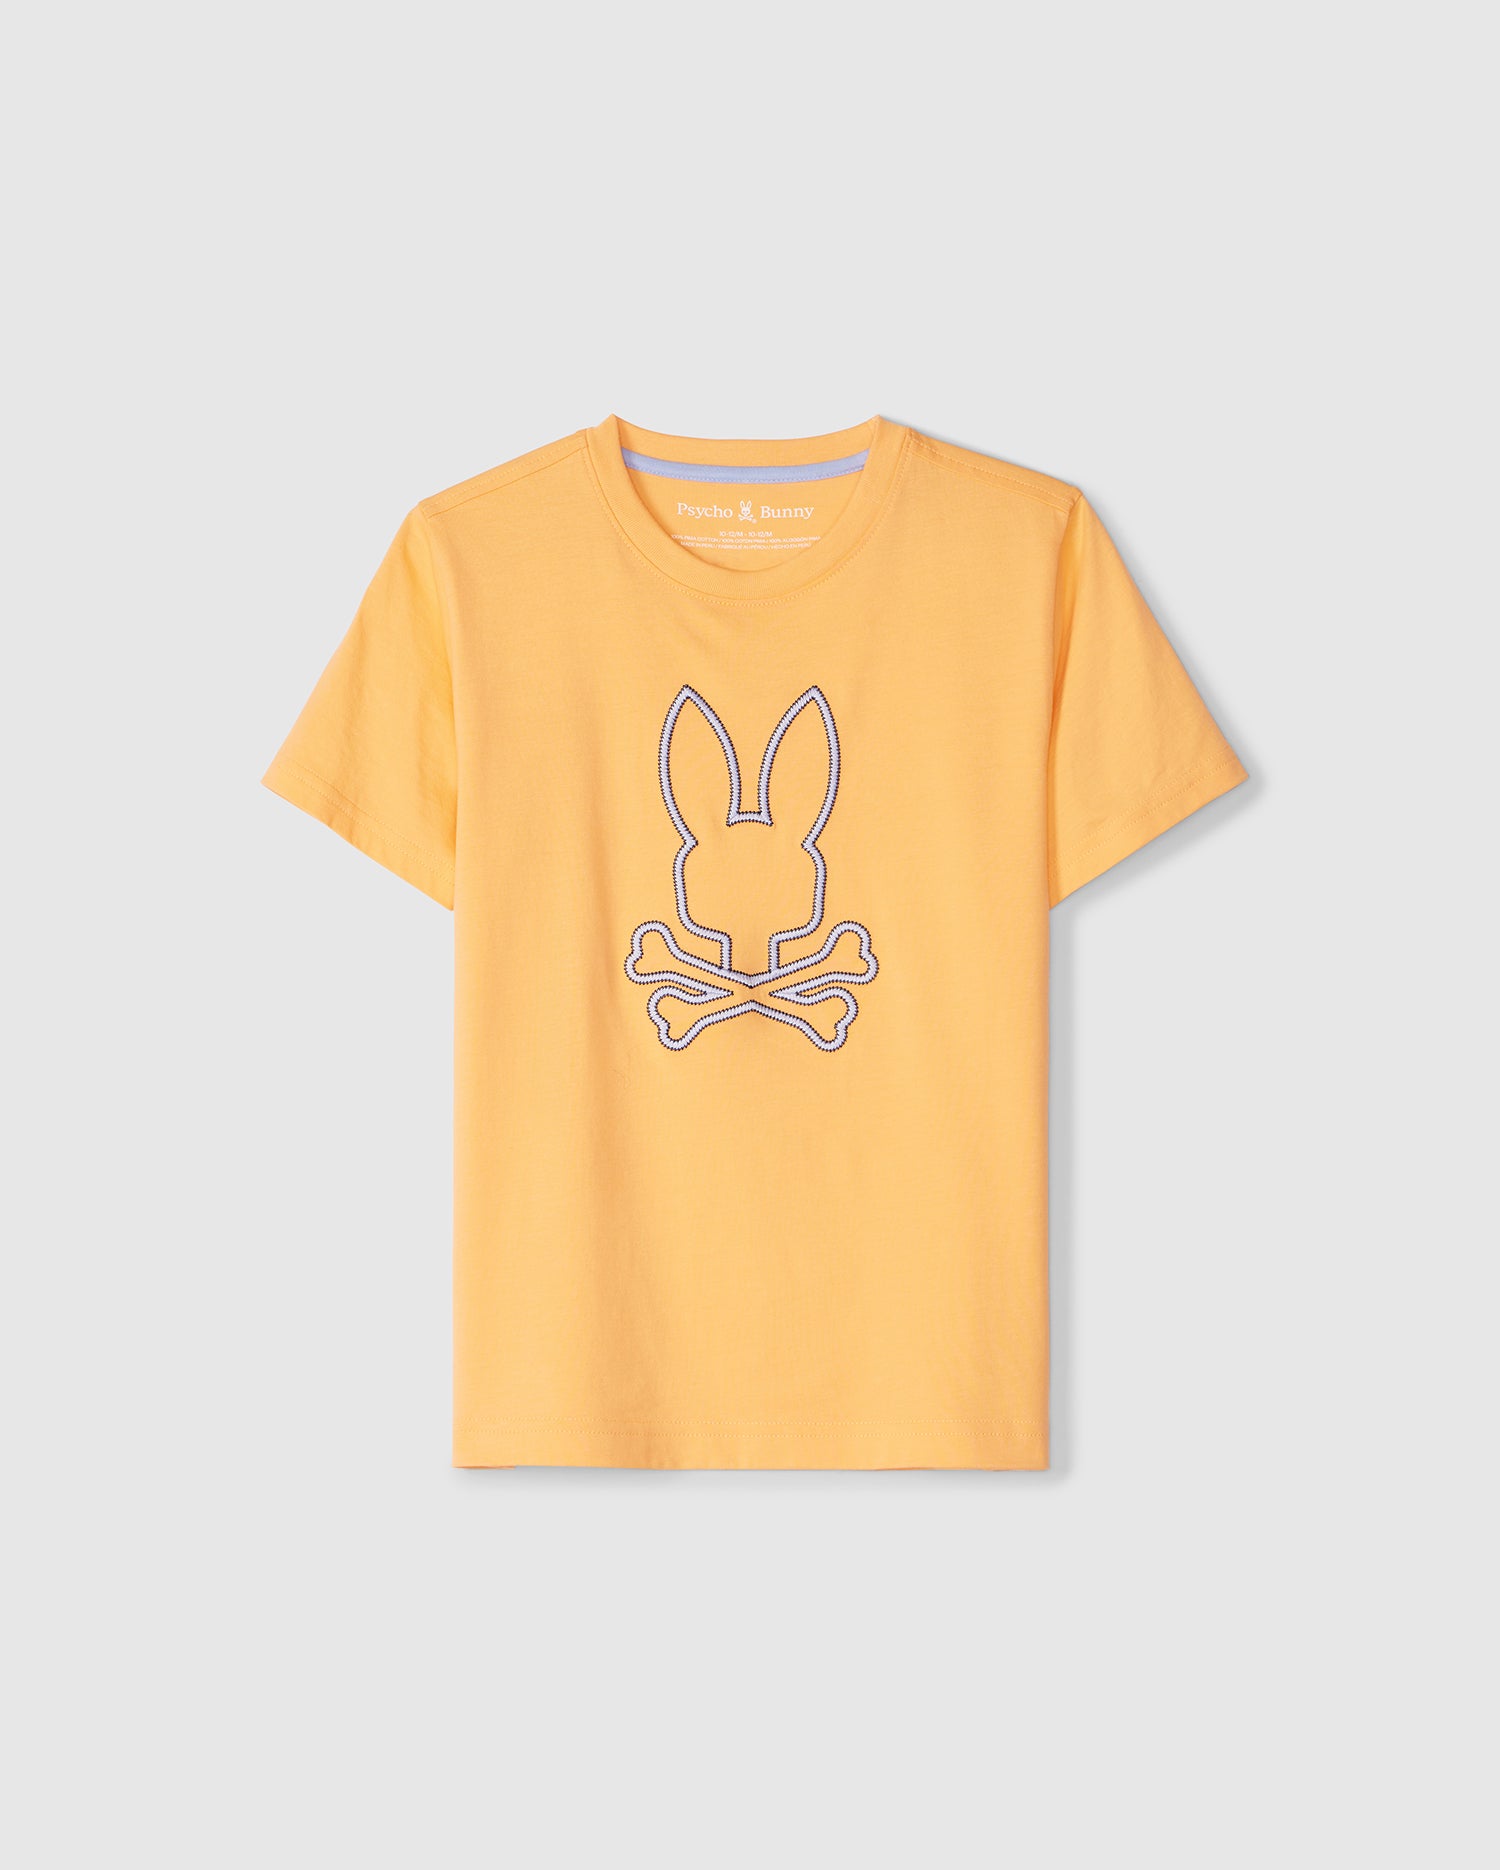 A plain yellow KIDS FLOYD GRAPHIC TEE with an embroidered Bunny outlined in white, sitting with crossed legs and arms positioned on its lap, displayed against a light grey background.